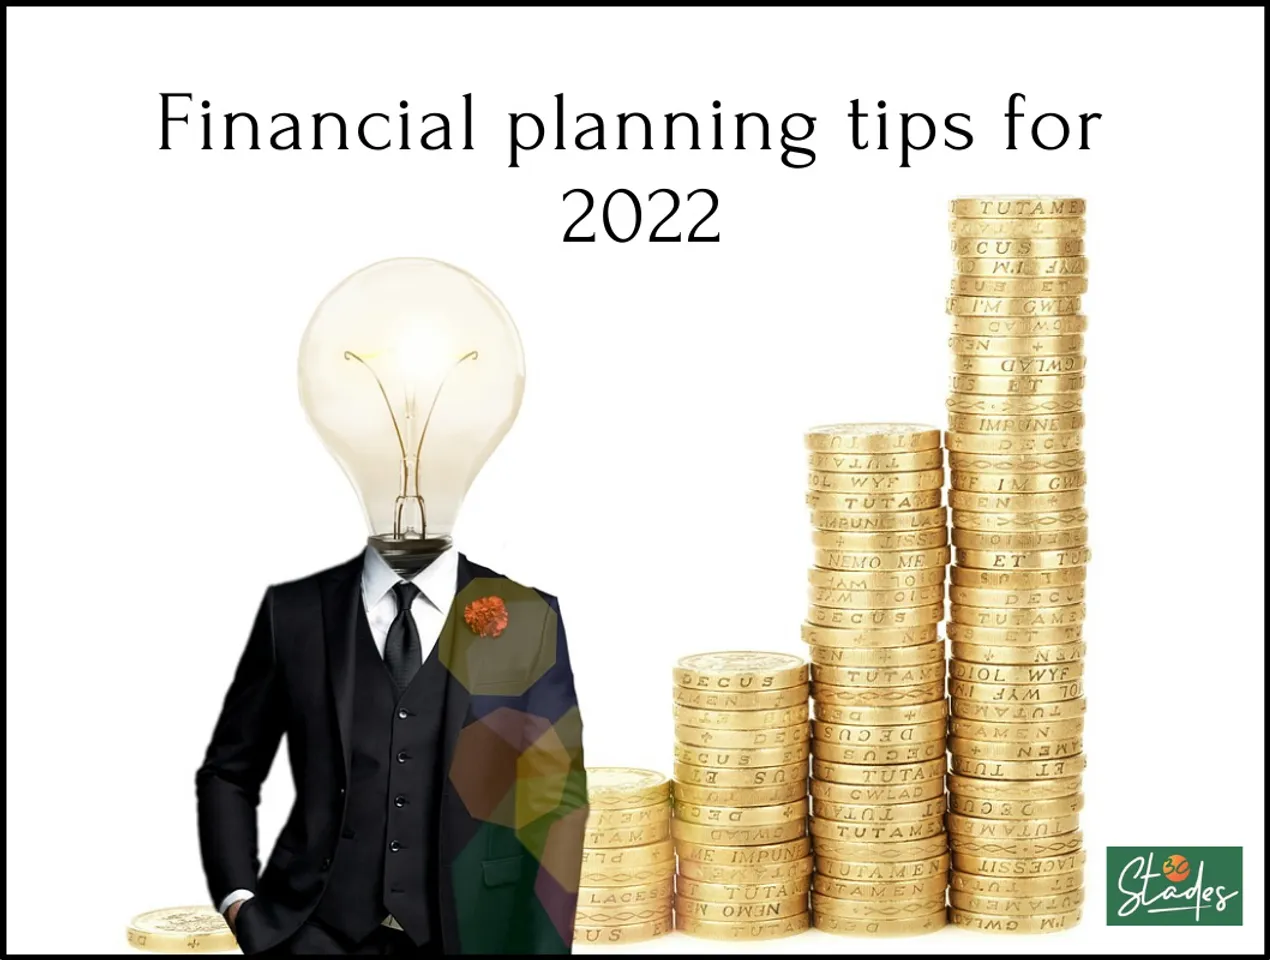 Five simple ways to invest & grow your money in 2022